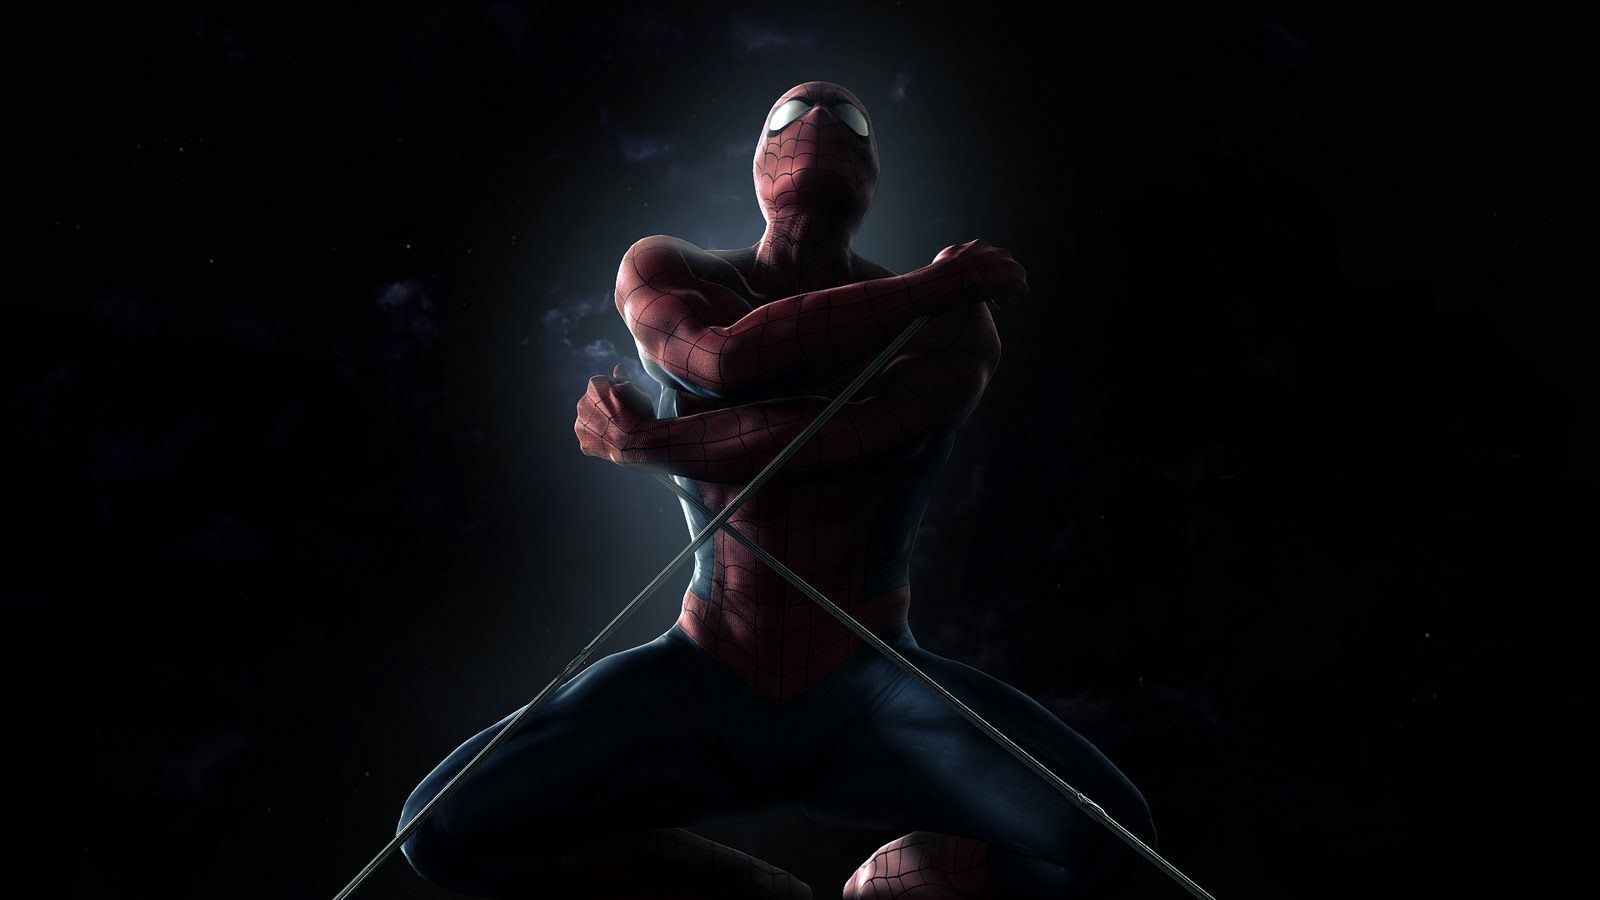 Spiderman 4 HD Wallpapers Spiderman 4 Images Cool Backgrounds